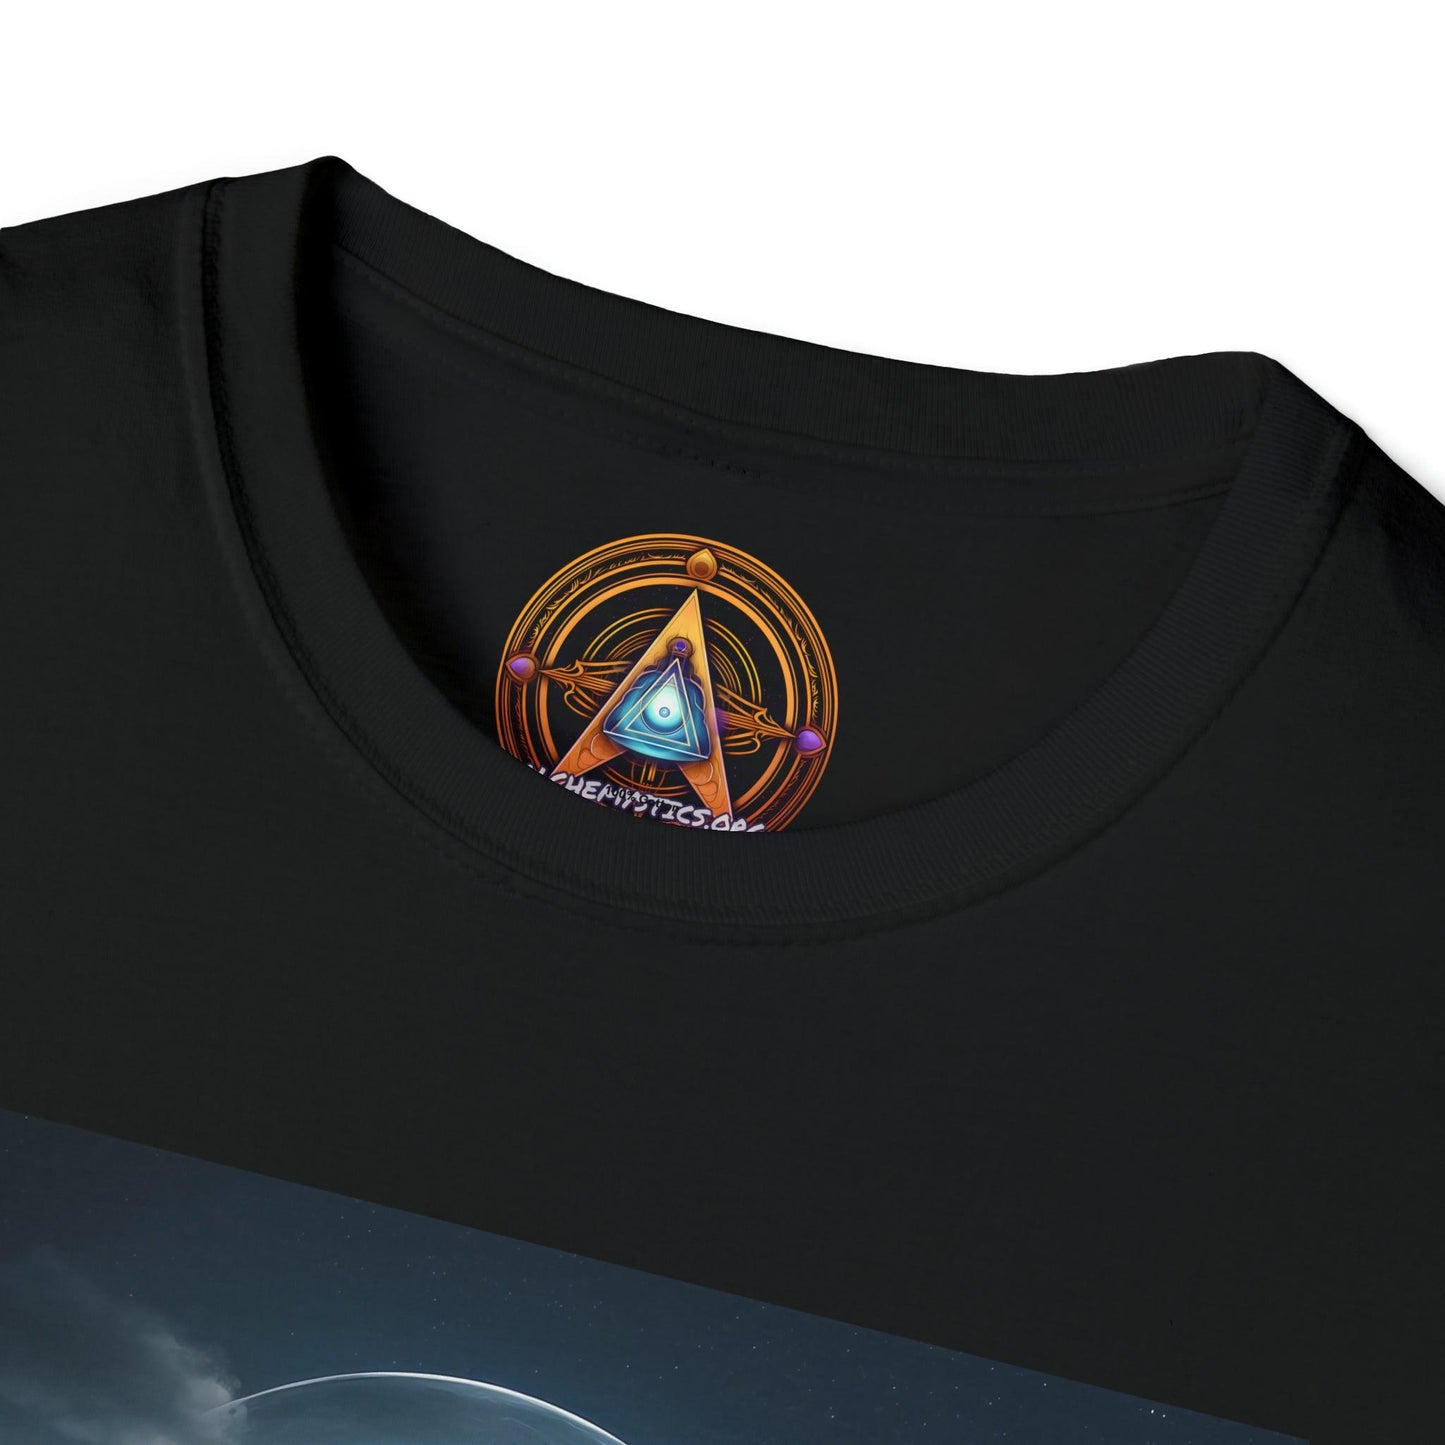 Cameron's Journey to the Eclipse at The Egyptian Pyramids - Visionary Psychedelic Ai Art Men's and Women's Unisex Soft Style T-Shirt for Festival and Street Wear - Alchemystics.org